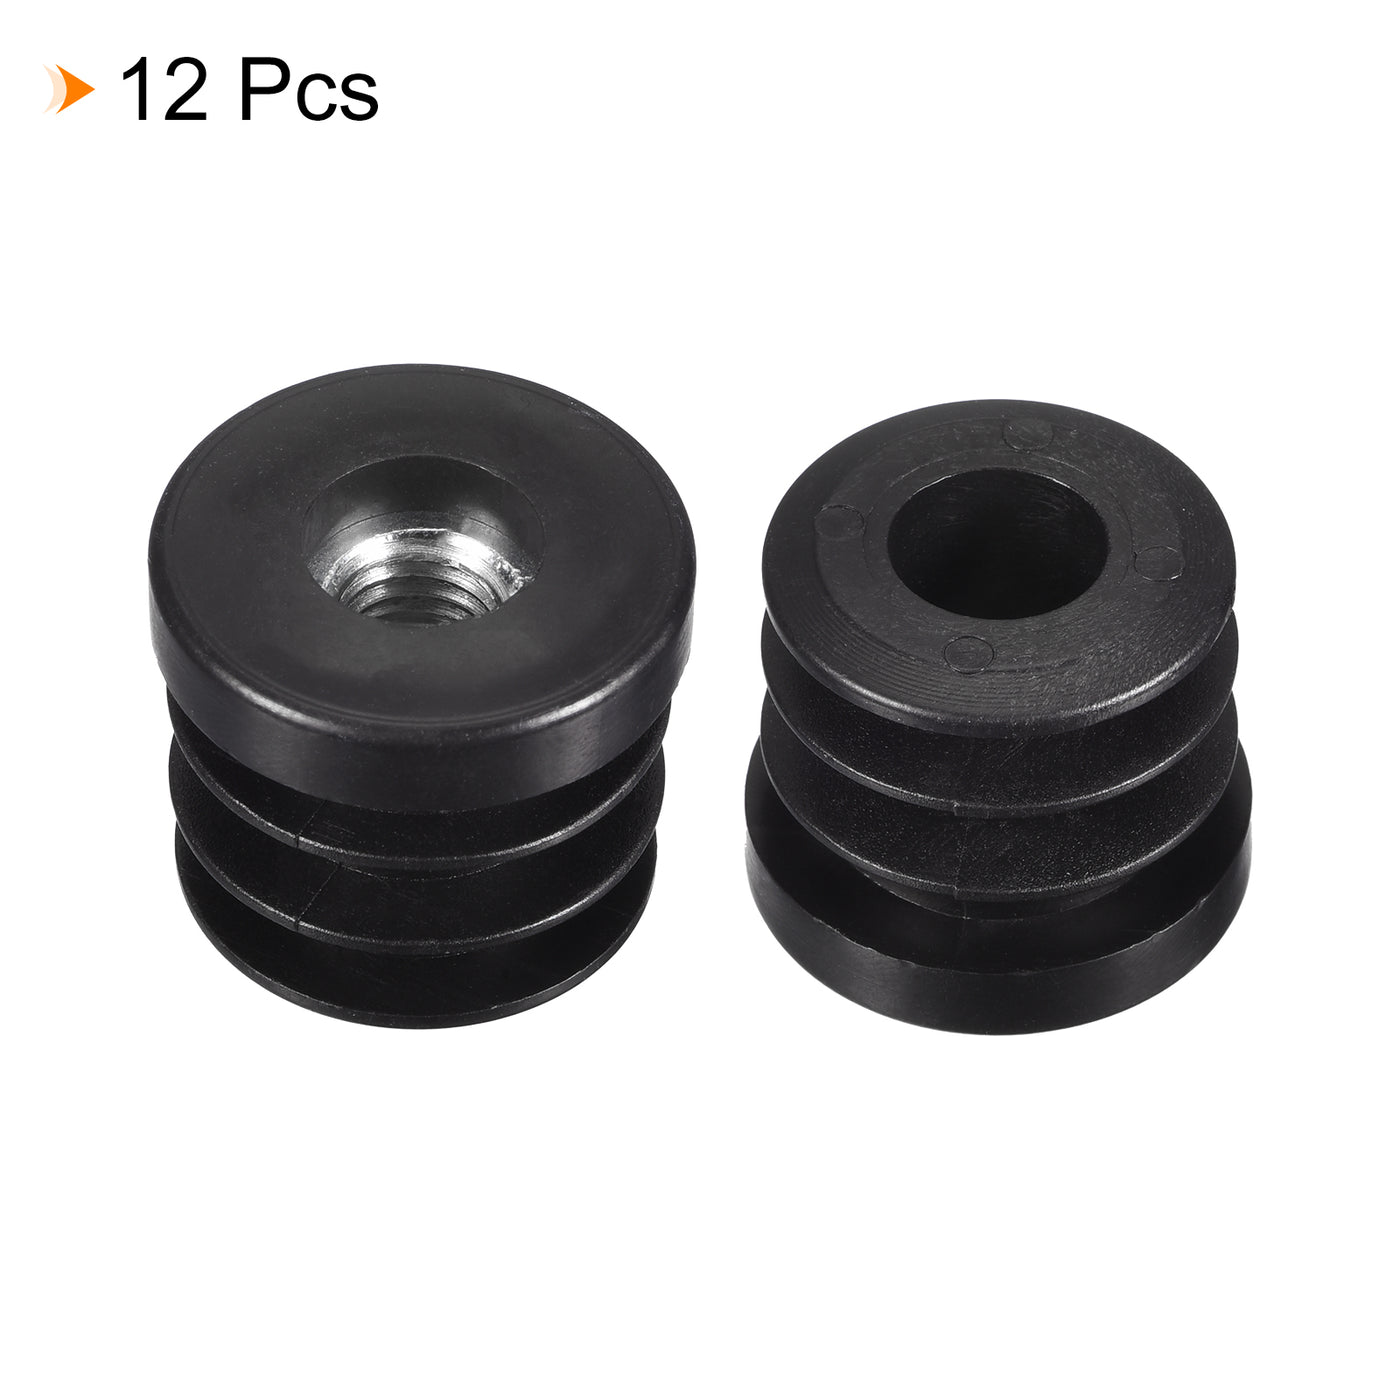 uxcell Uxcell 12Pcs 30mm/1.18" Caster Insert with Thread, Round M10 Thread for Furniture